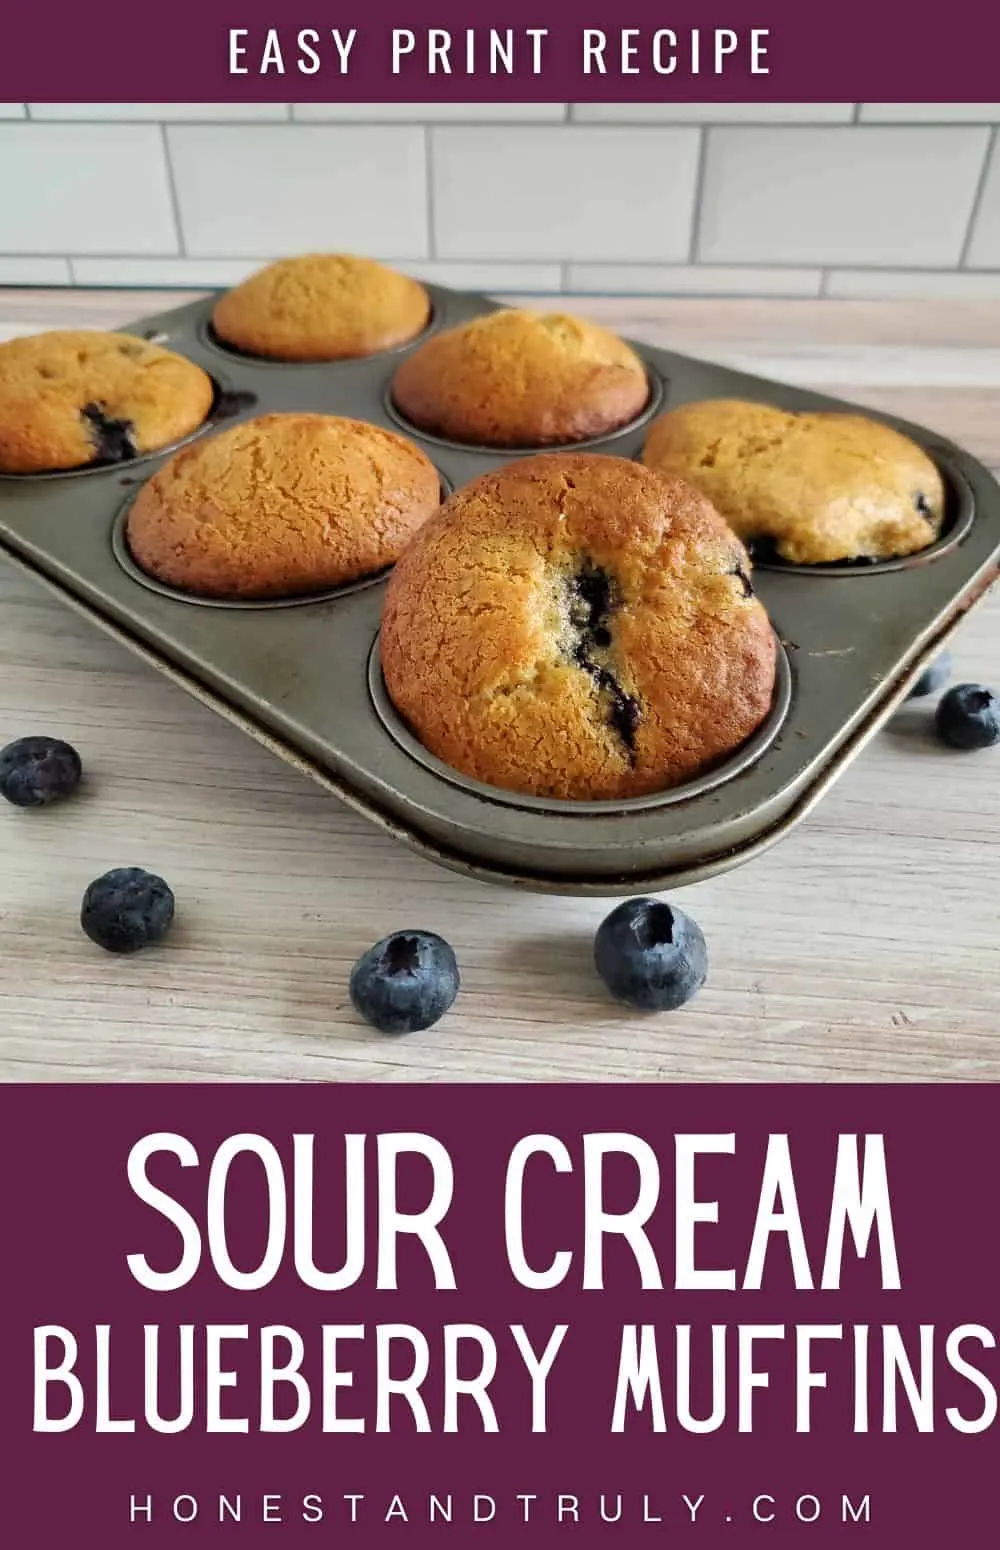 Blueberry muffins in a tin with text sour cream blueberry muffins.